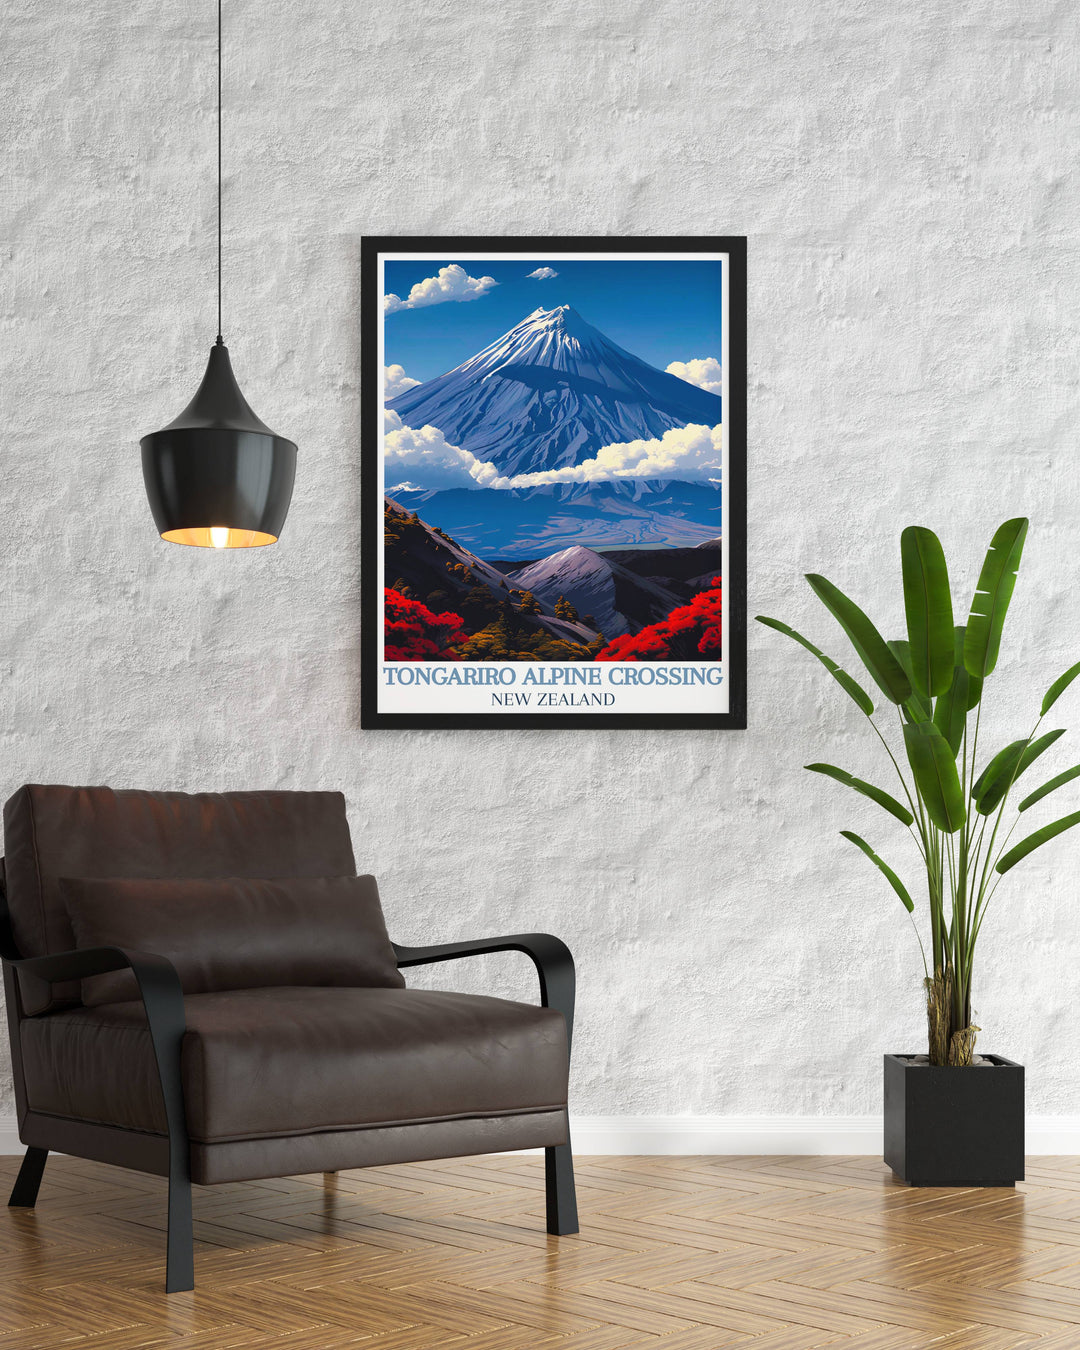 Mount Ngauruhoe vintage posters capturing the enduring allure of this iconic volcano with a vintage style that adds a unique and nostalgic touch to any room.